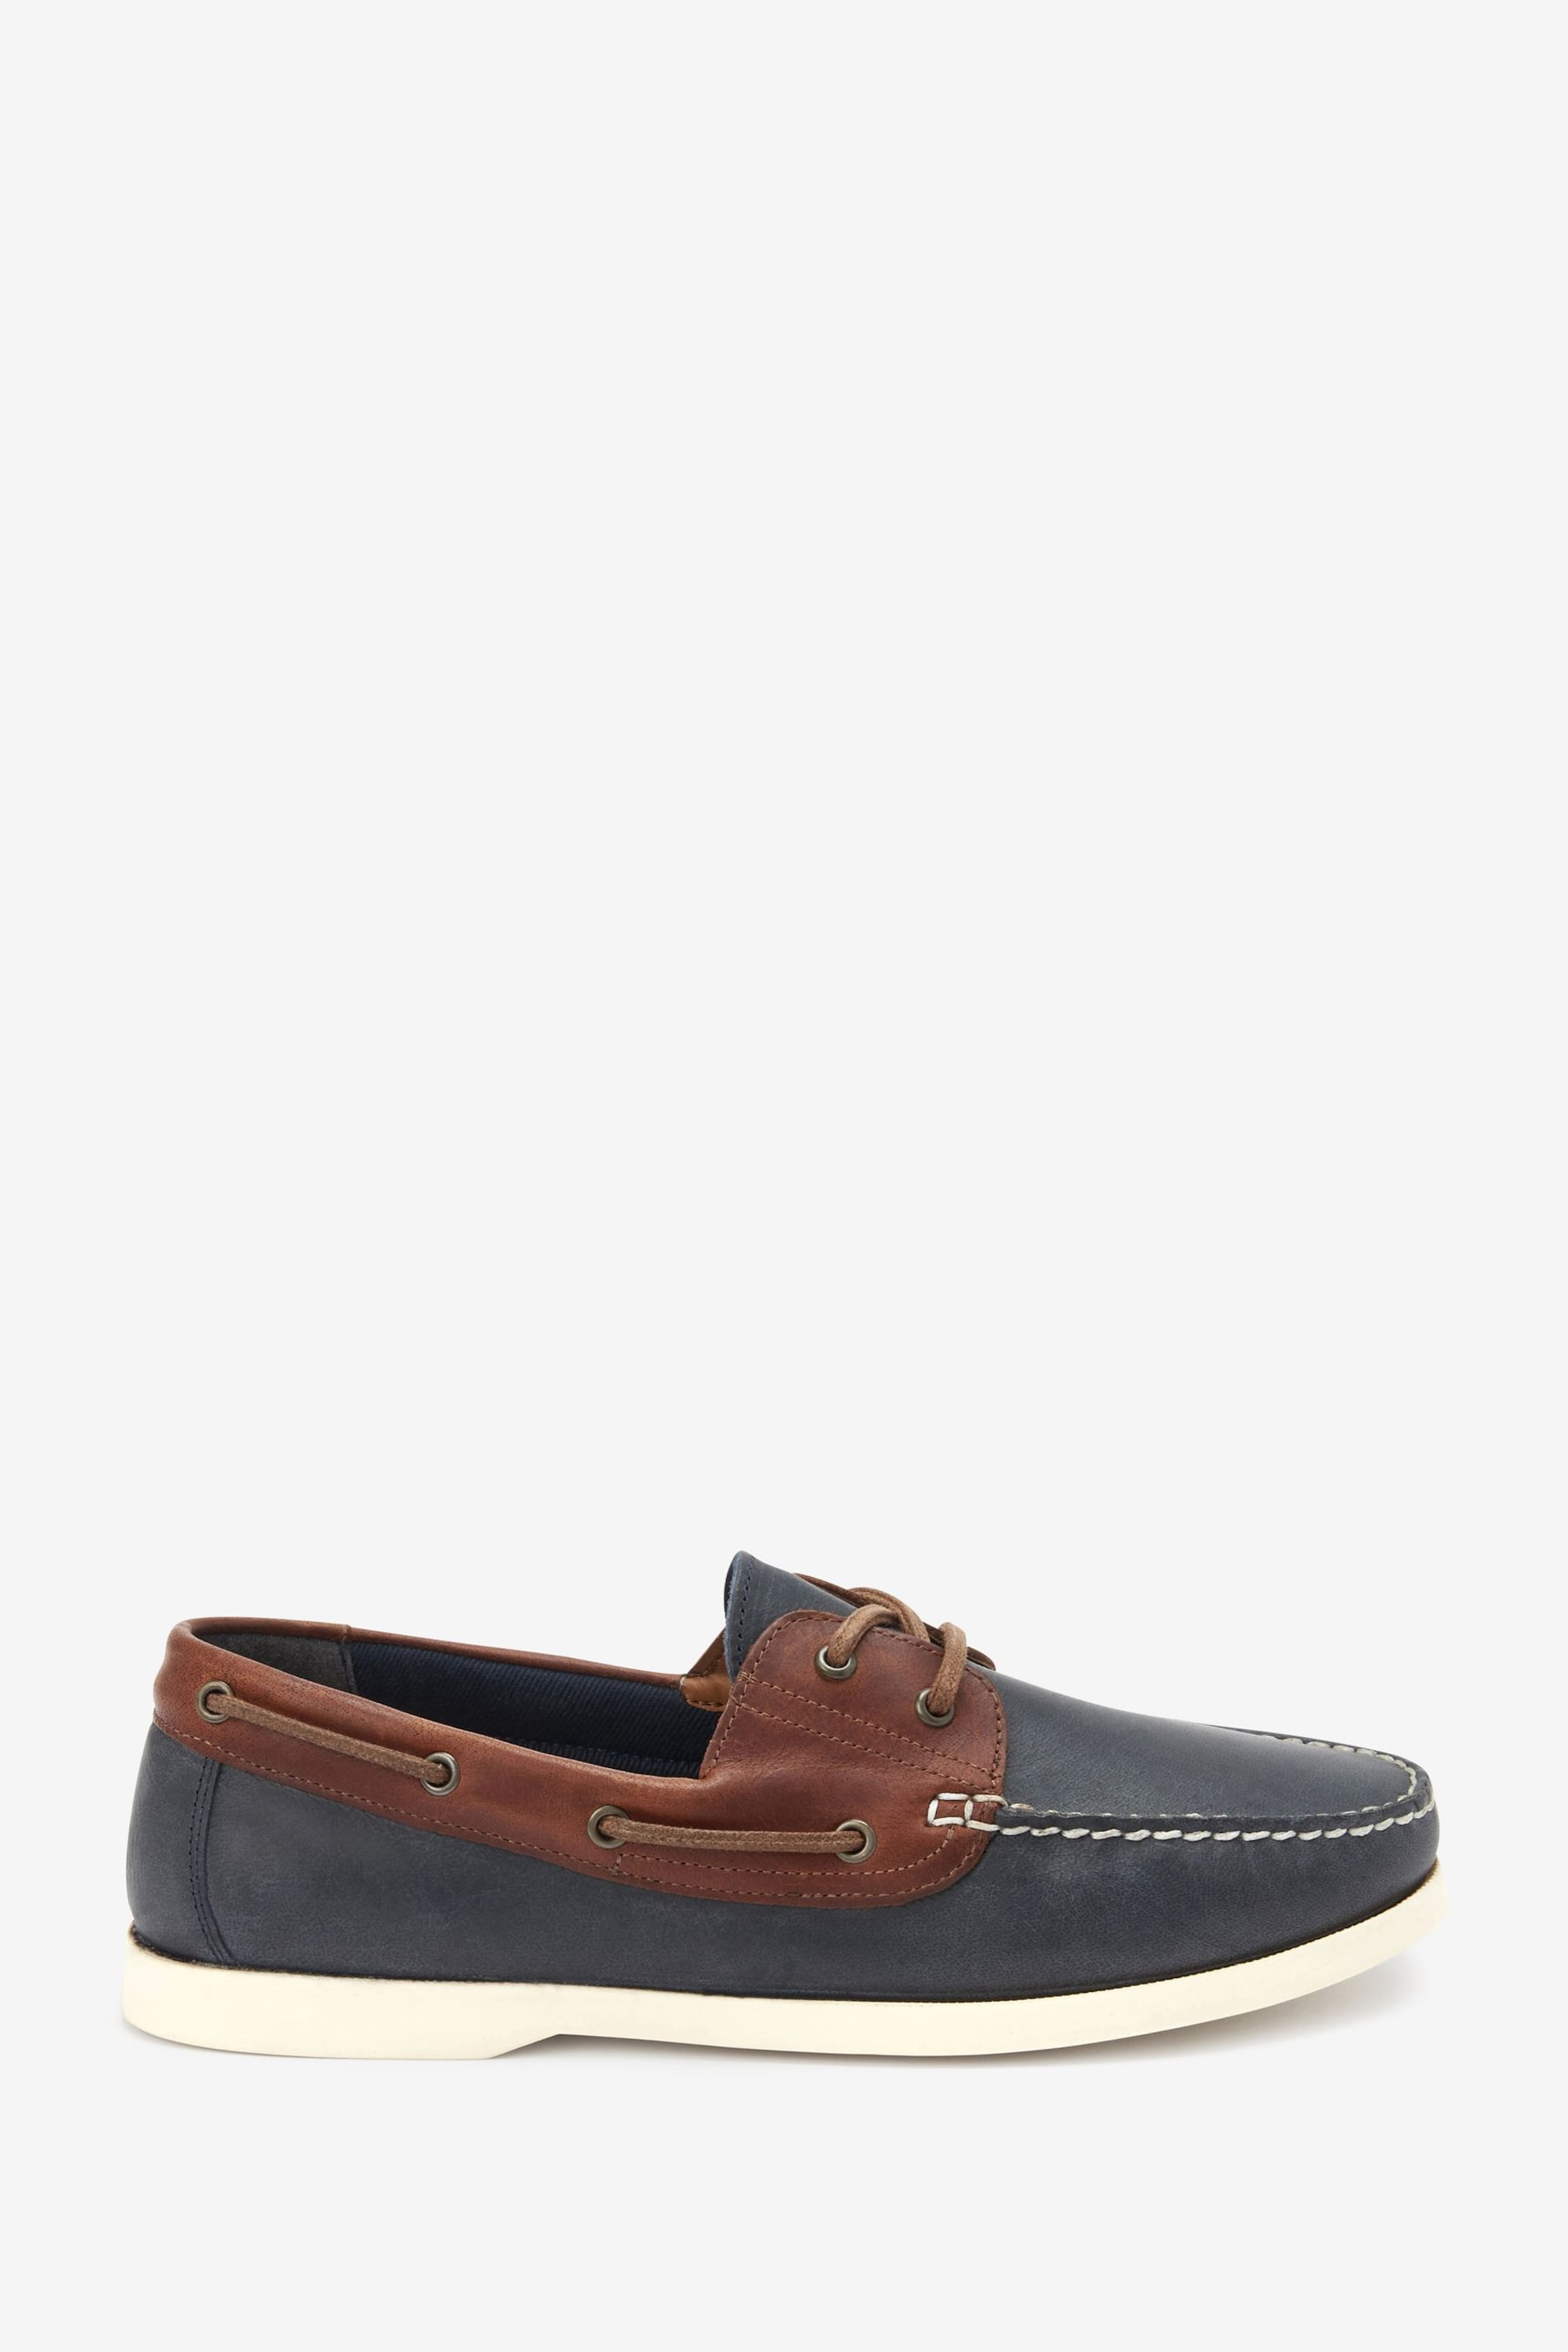 Navy Blue Leather Boat Shoes - Image 2 of 5